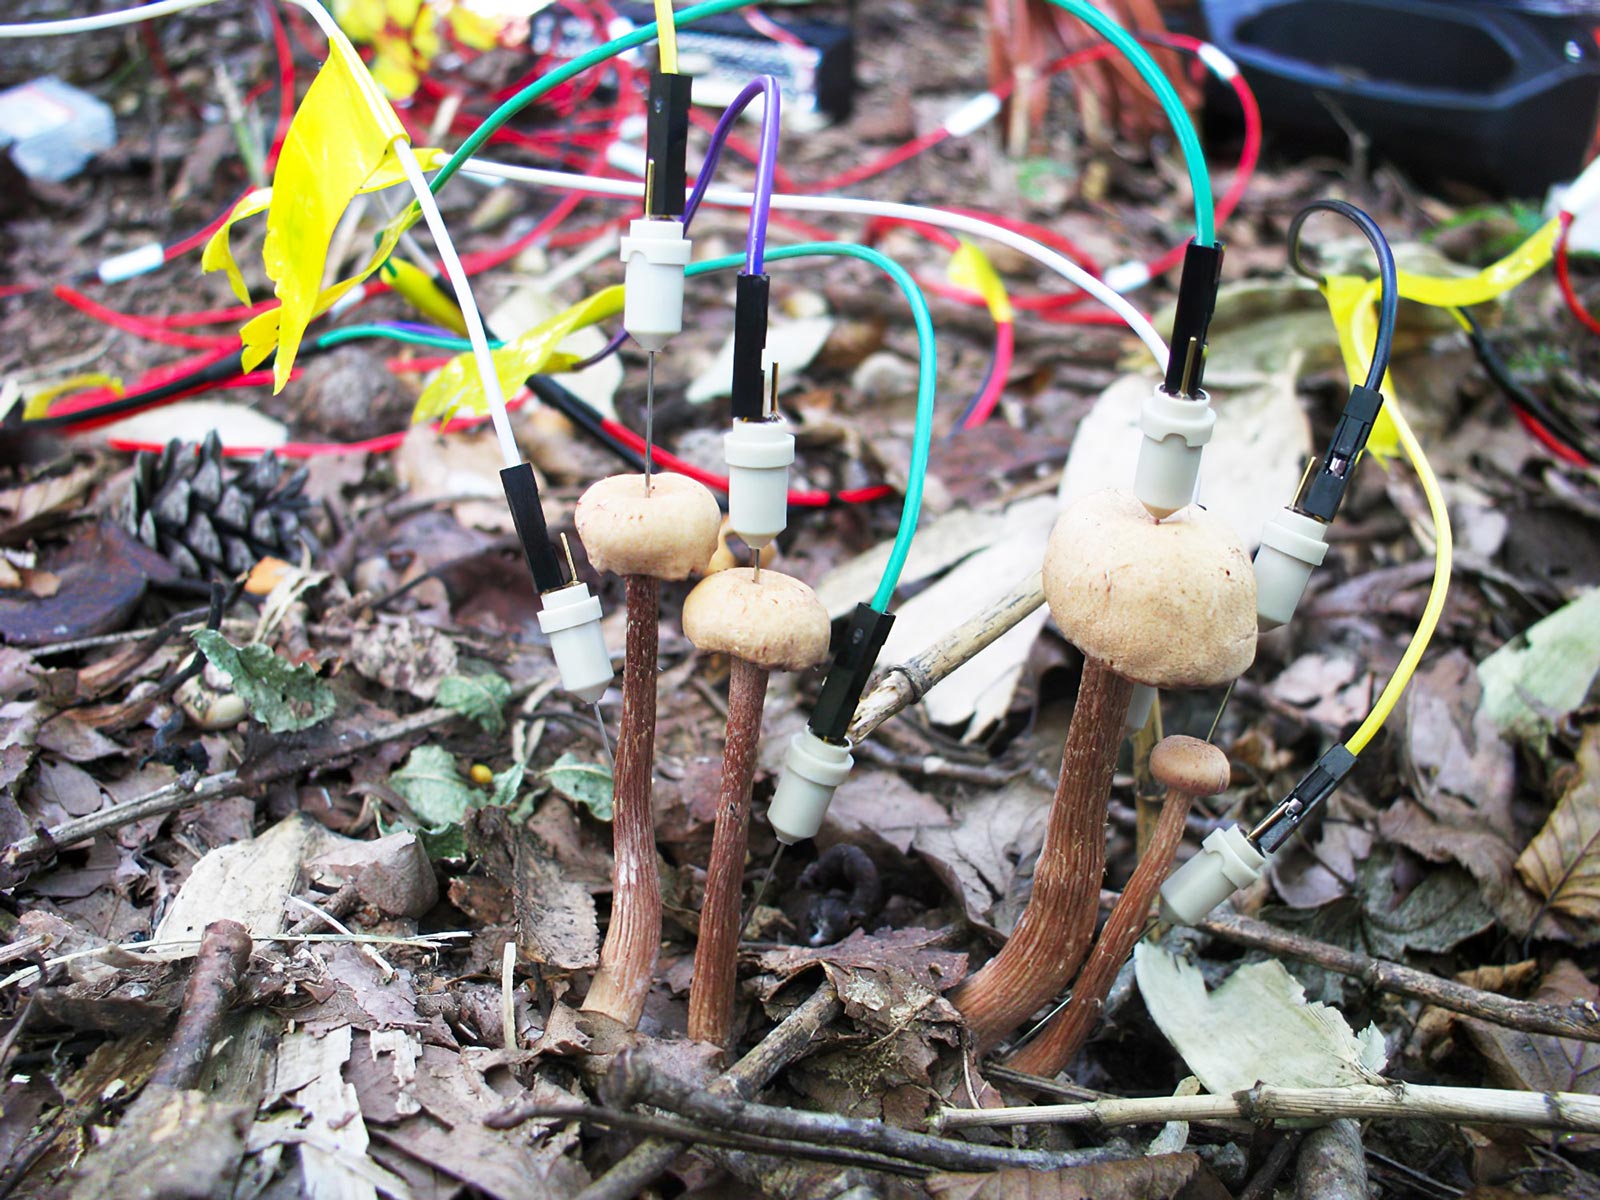 Rainfall Sparks Electric Chatter Among Forest Mushrooms – SciTechDaily